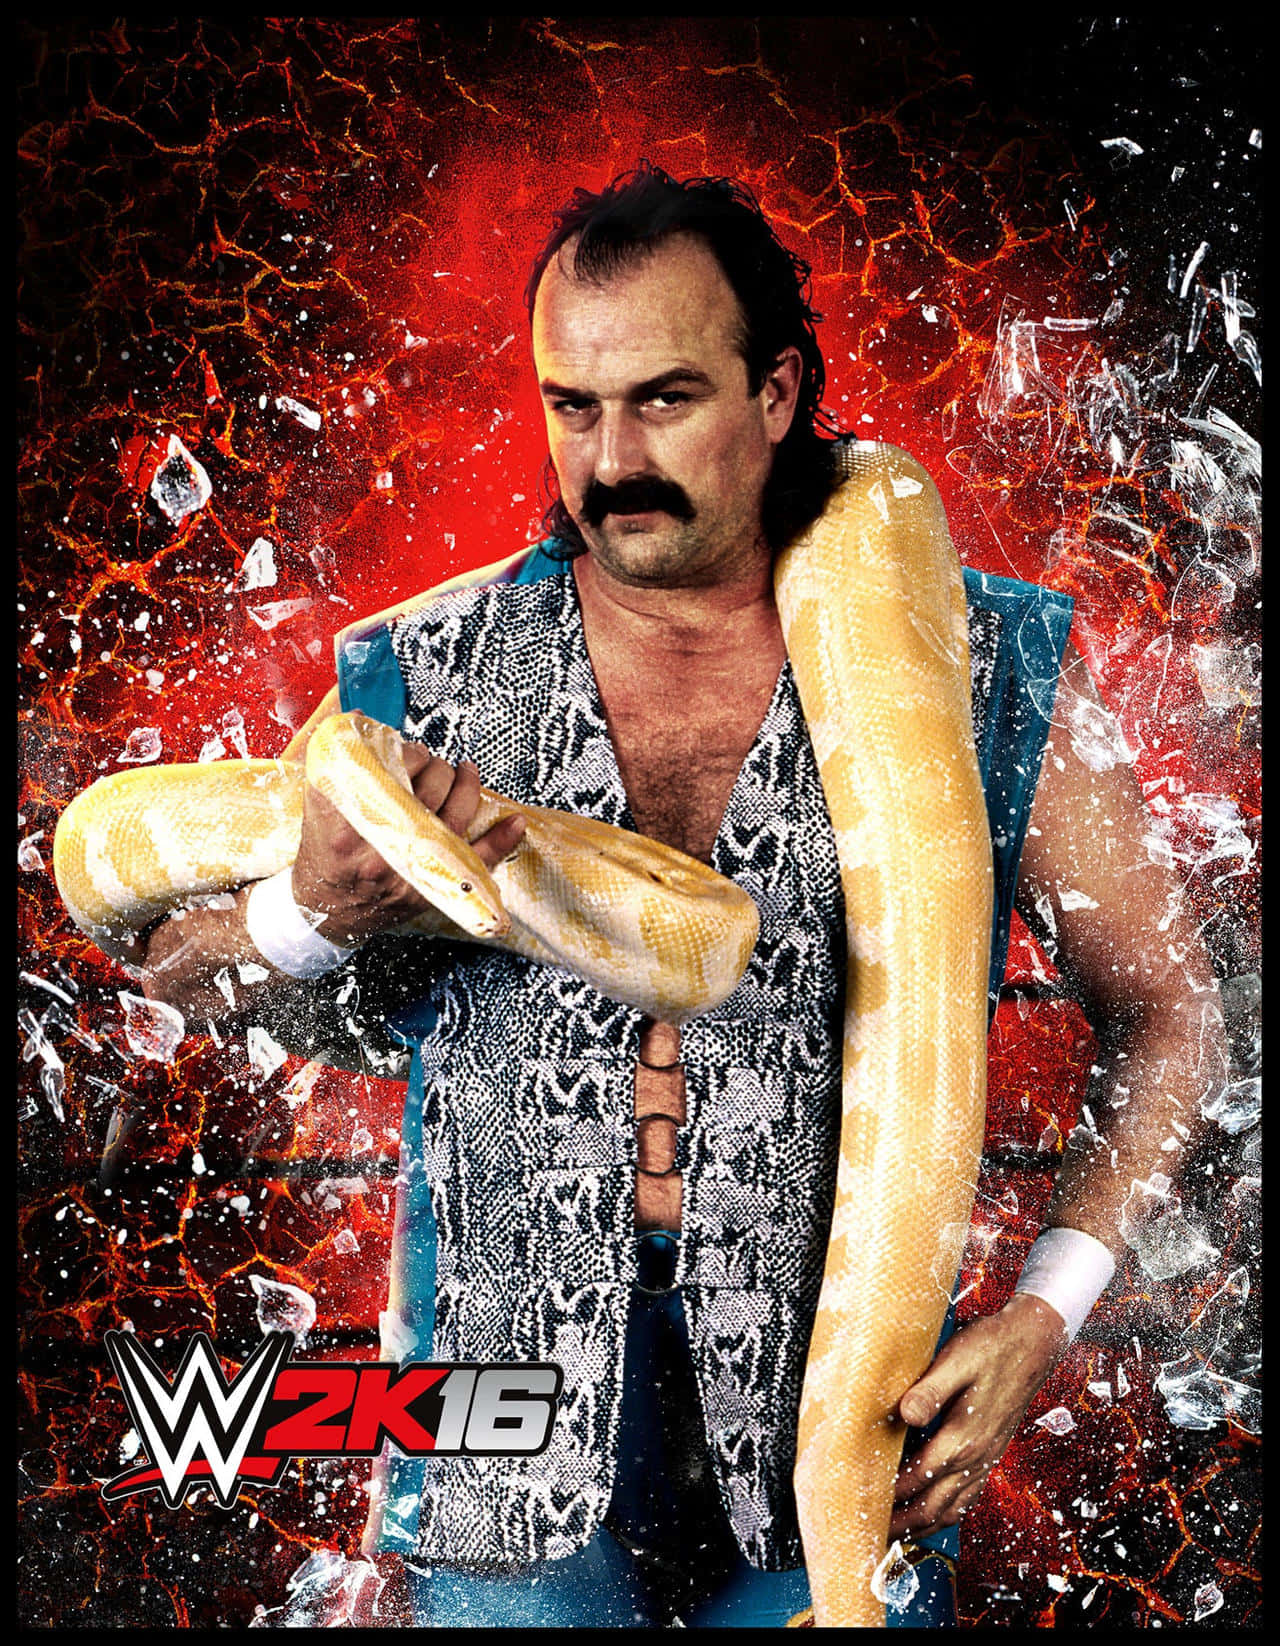 Jake Roberts with his signature Yellow Ball Python in WWE 2K16 Wallpaper